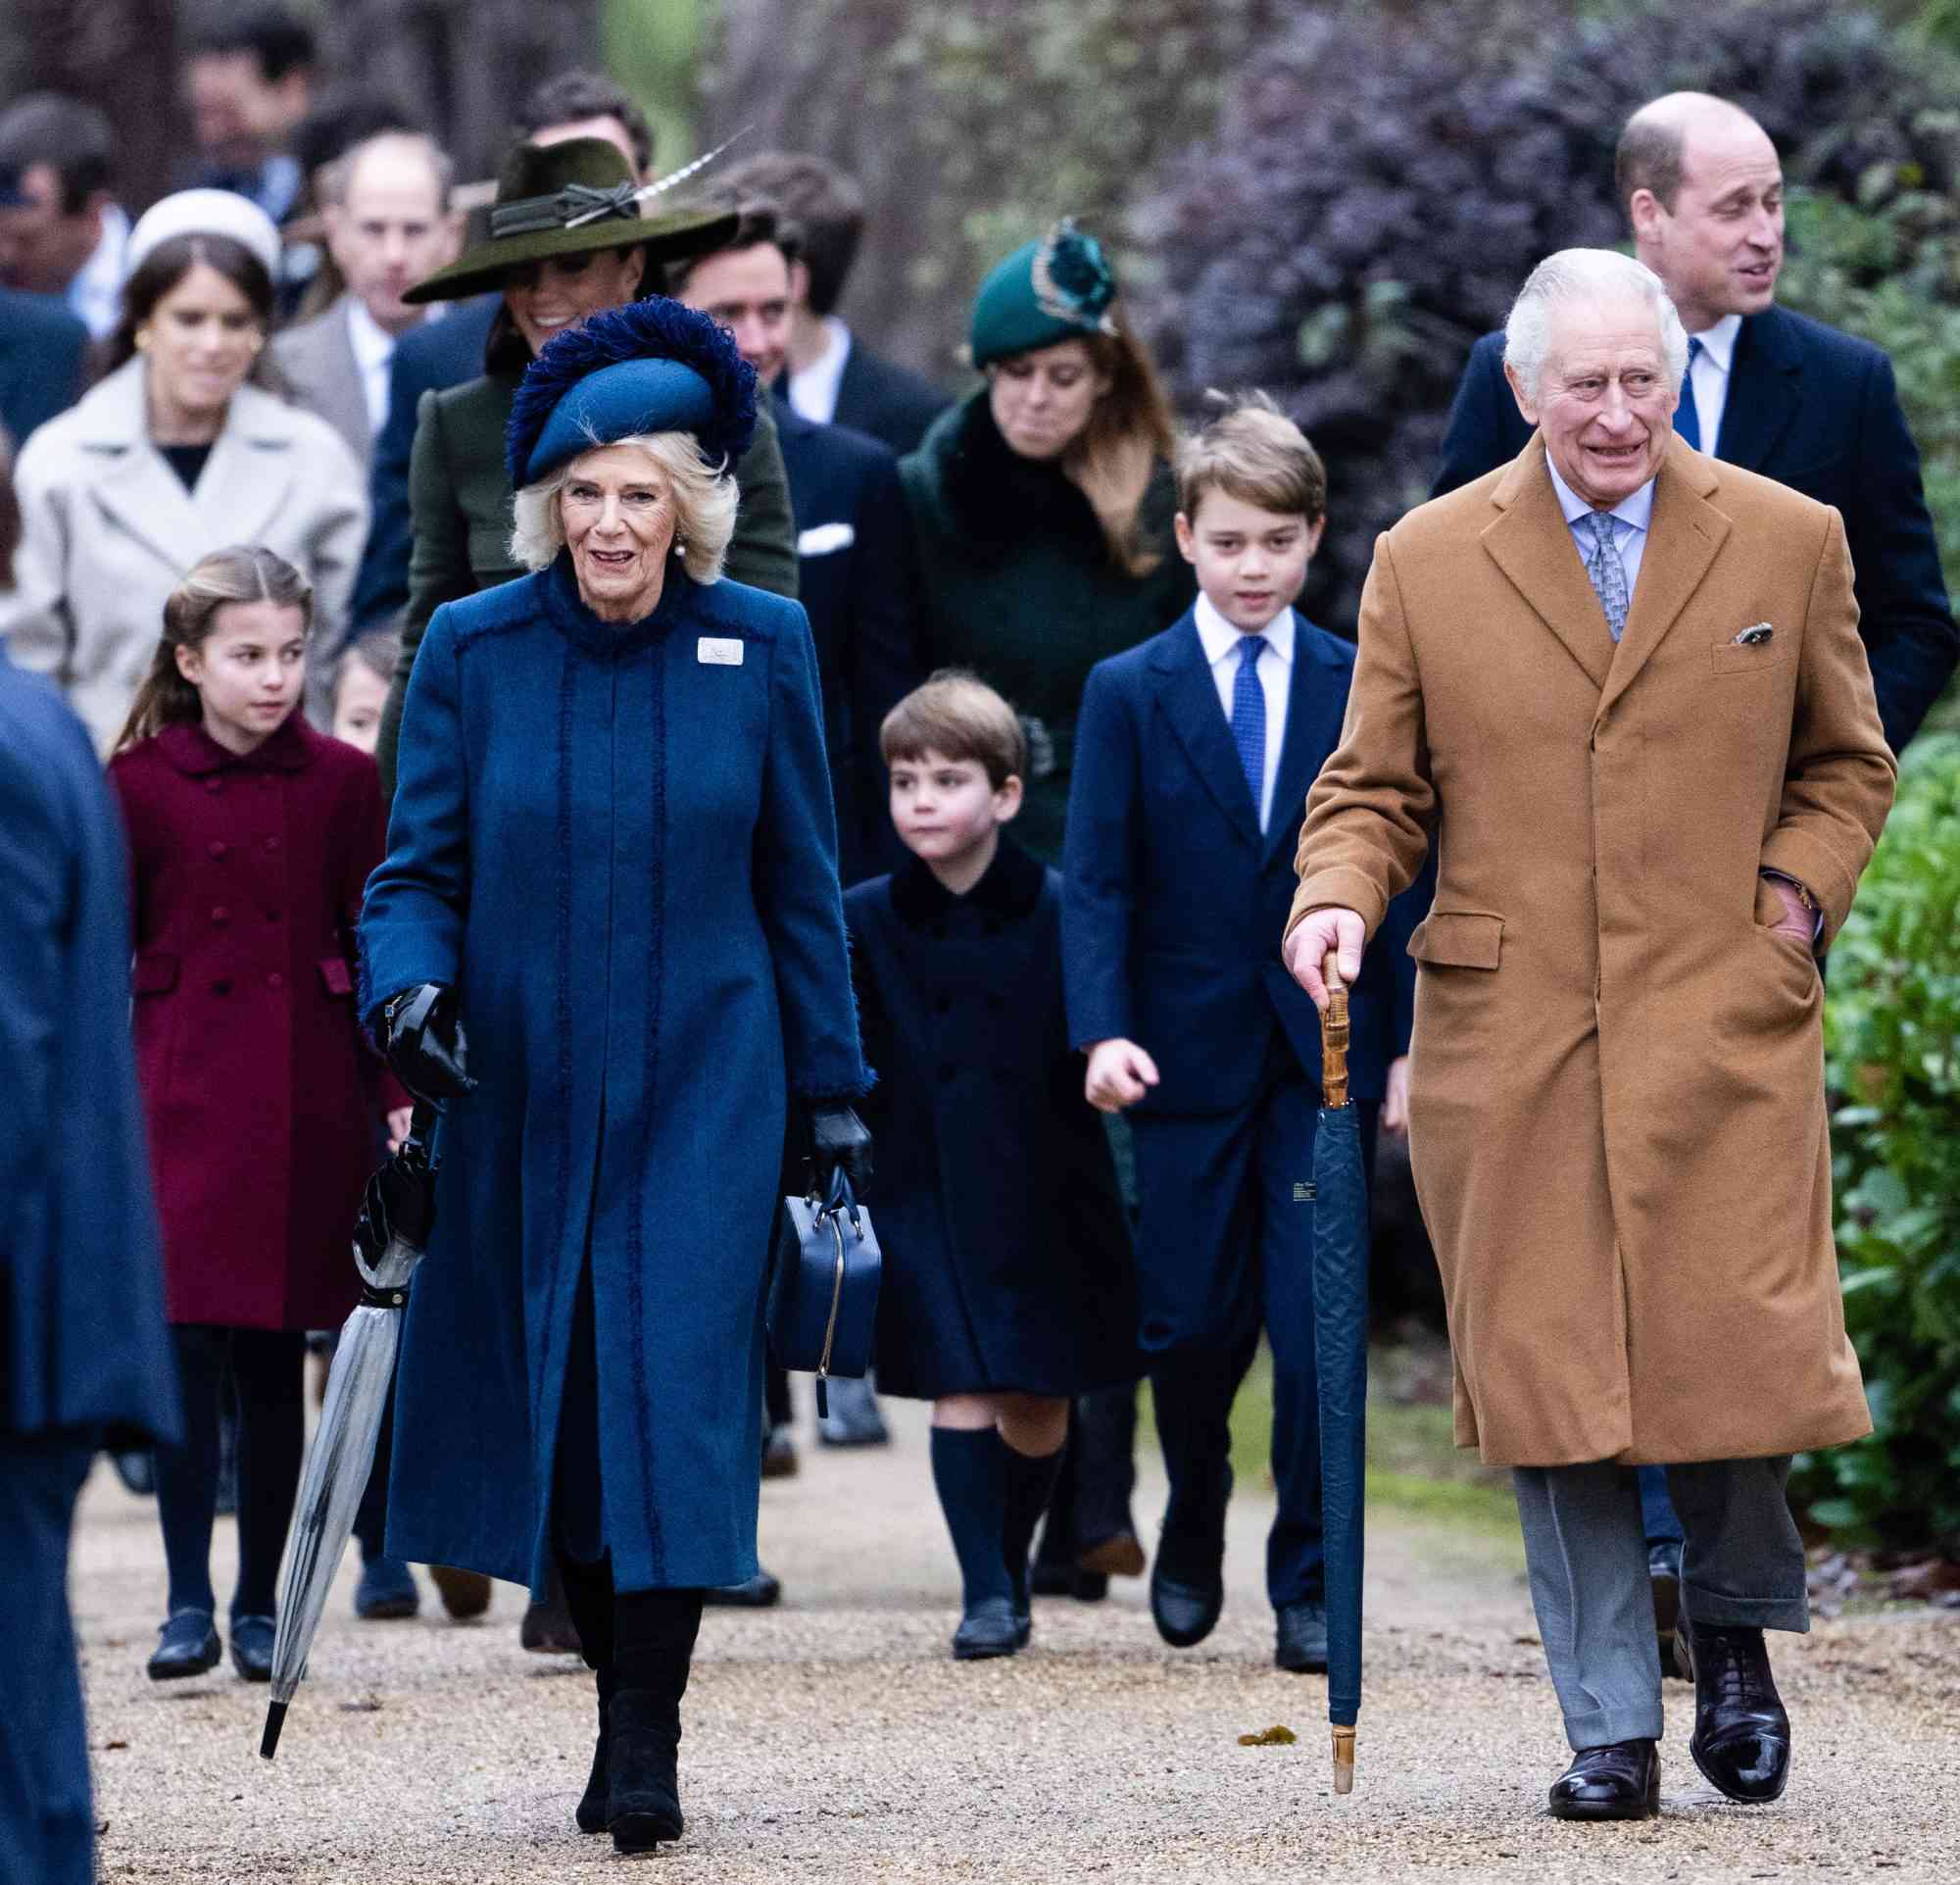 SANDRINGHAM, NORFOLK - DECEMBER 25: Princess Charlotte, Catherine, Princess of Wales, Camilla, Queen Consort, Prince Louis, Prince George and King Charles III attend the Christmas Day service at Sandringham Church on December 25, 2022 in Sandringham, Norfolk. King Charles III ascended to the throne on September 8, 2022, with his coronation set for May 6, 2023. (Photo by Samir Hussein/WireImage)